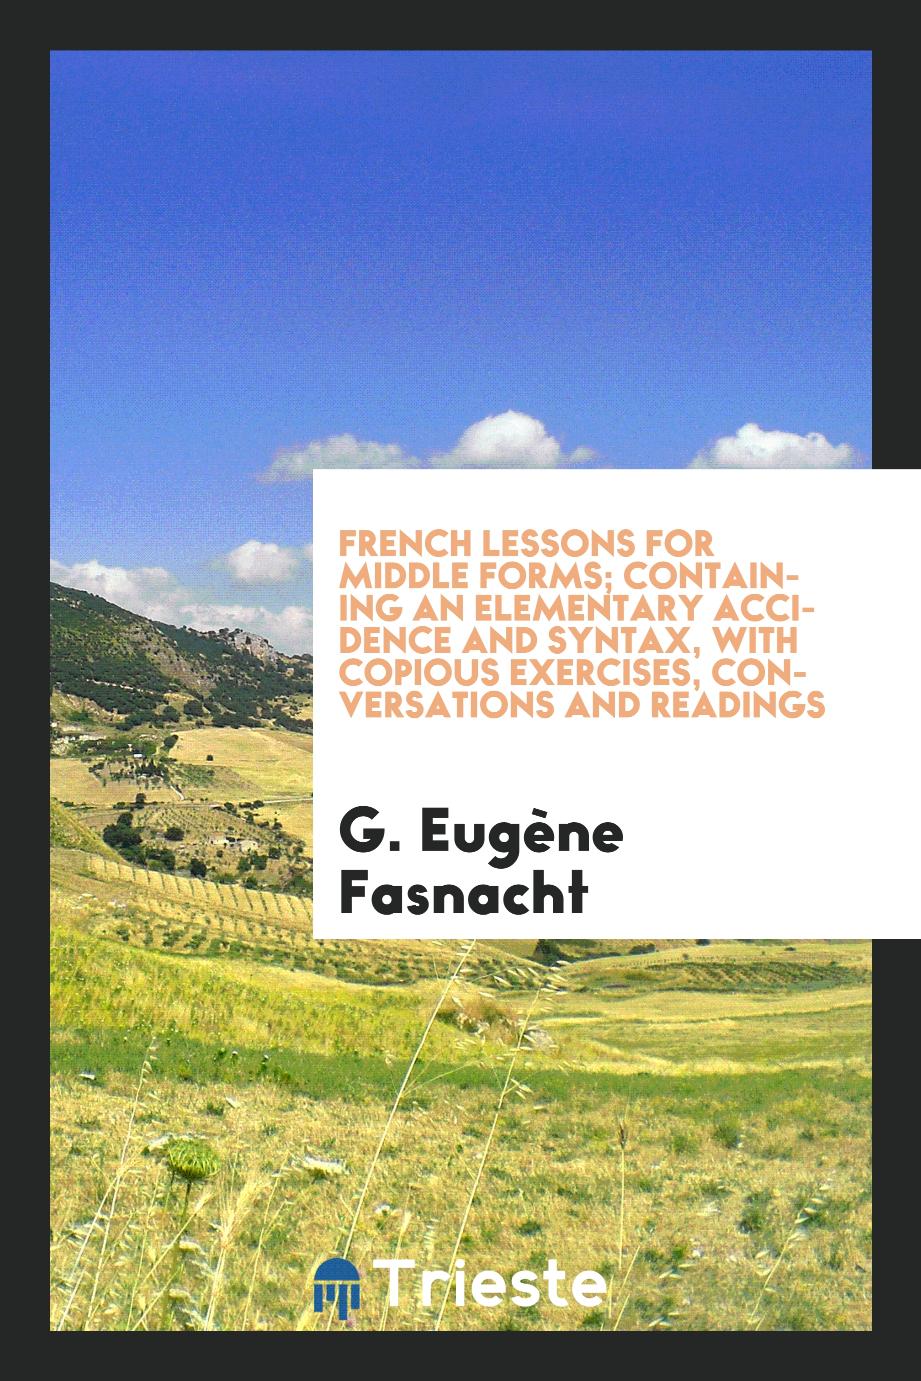 French lessons for middle forms; containing an elementary accidence and syntax, with copious exercises, conversations and readings